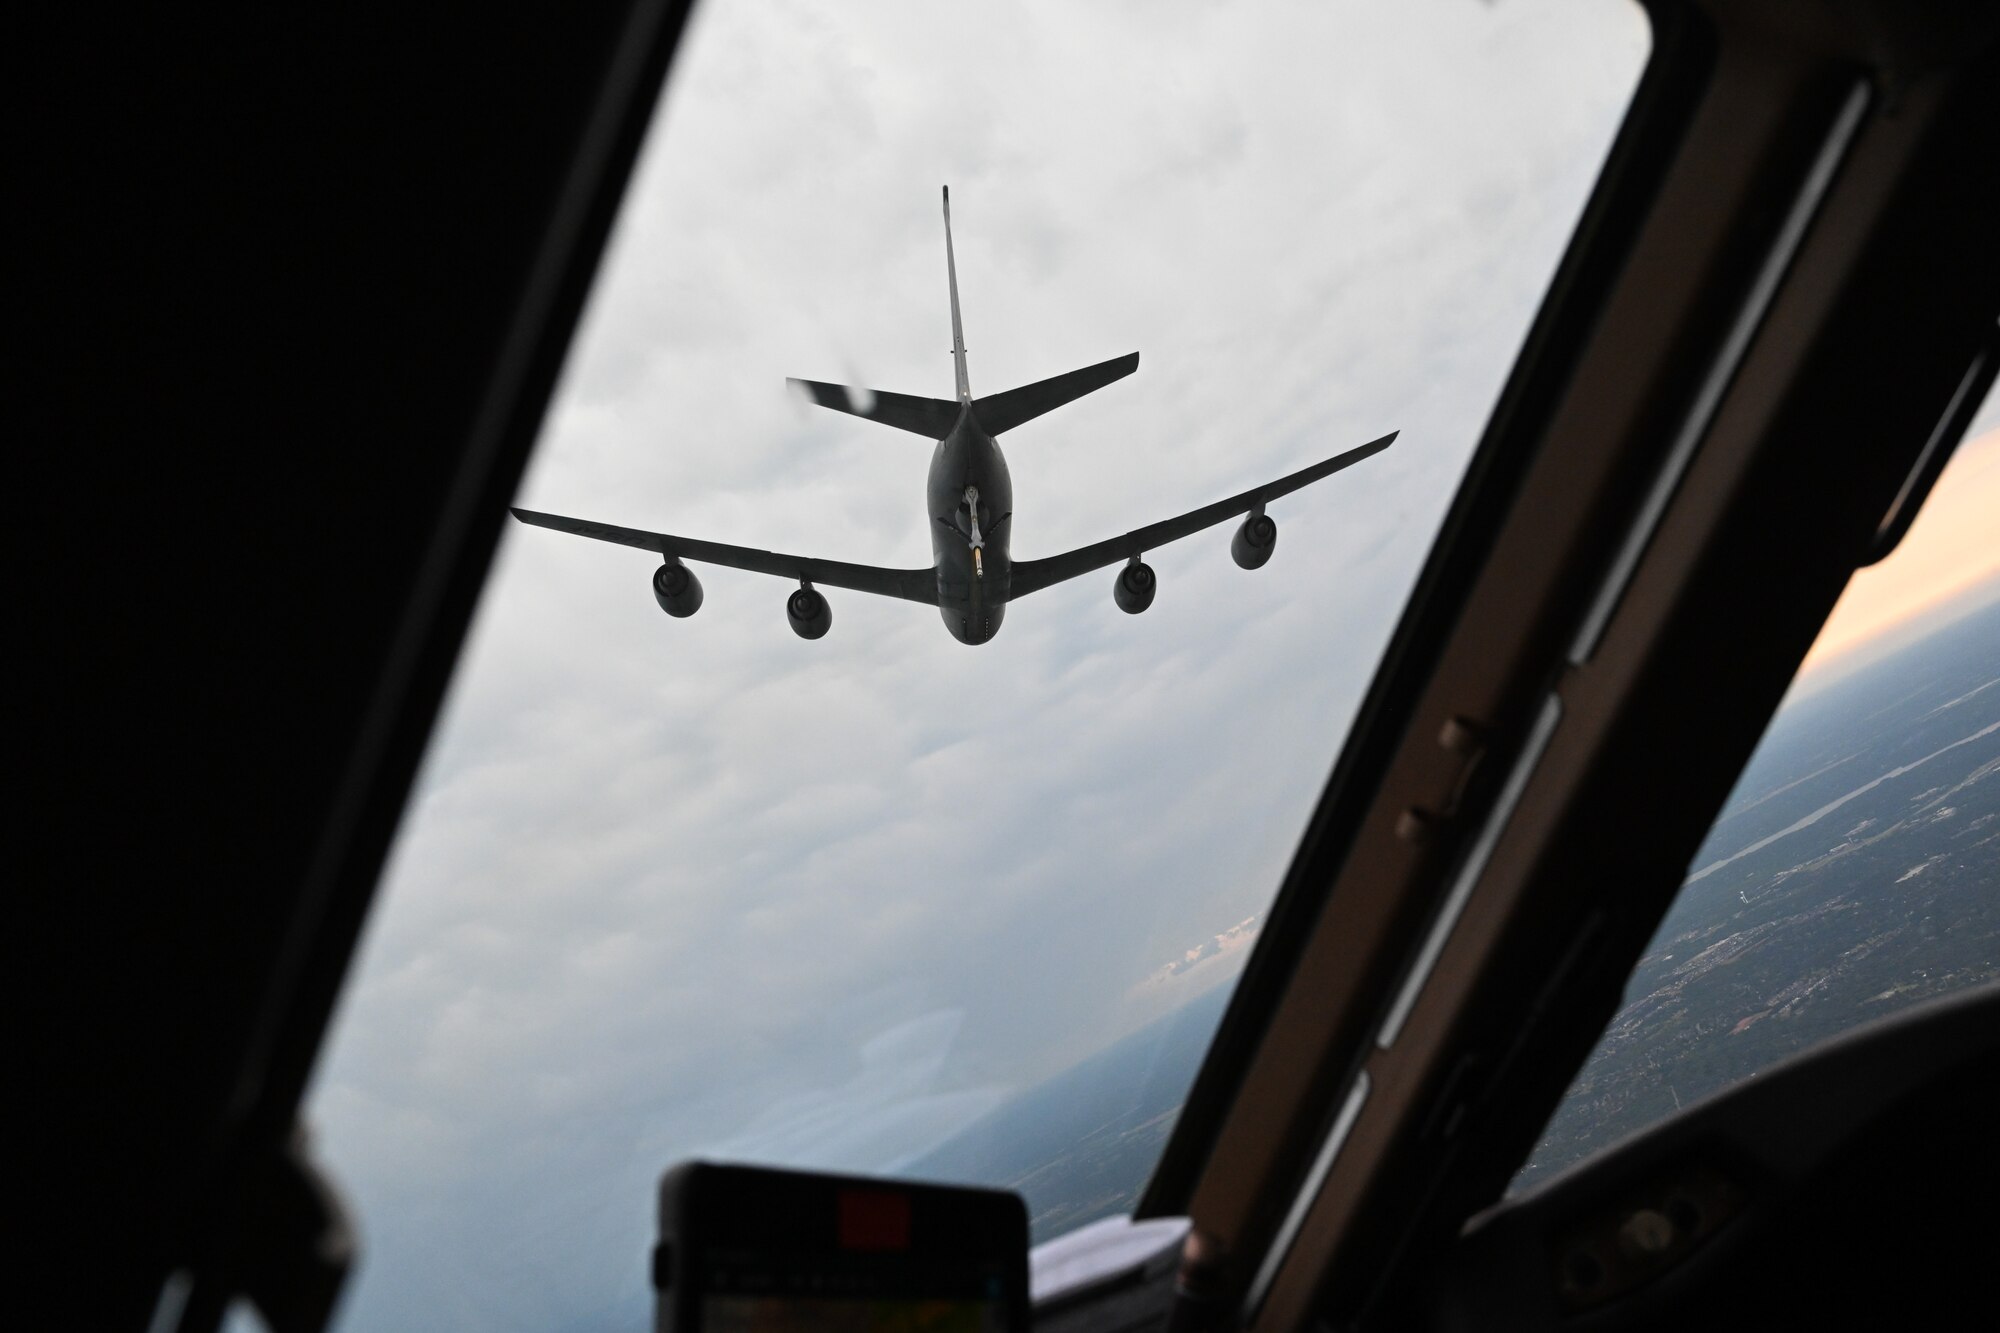 A KC-135 Stratotanker flies above a KC-46 Pegasus during the air refueling centennial flyoverin Texas and Oklahoma, June 27, 2023. Several air mobility bases from across the countryparticipated in their own flyovers to celebrate 100 years of air refuelingl. (U.S. Air Force photosby Airman 1st Class Miyah Gray)